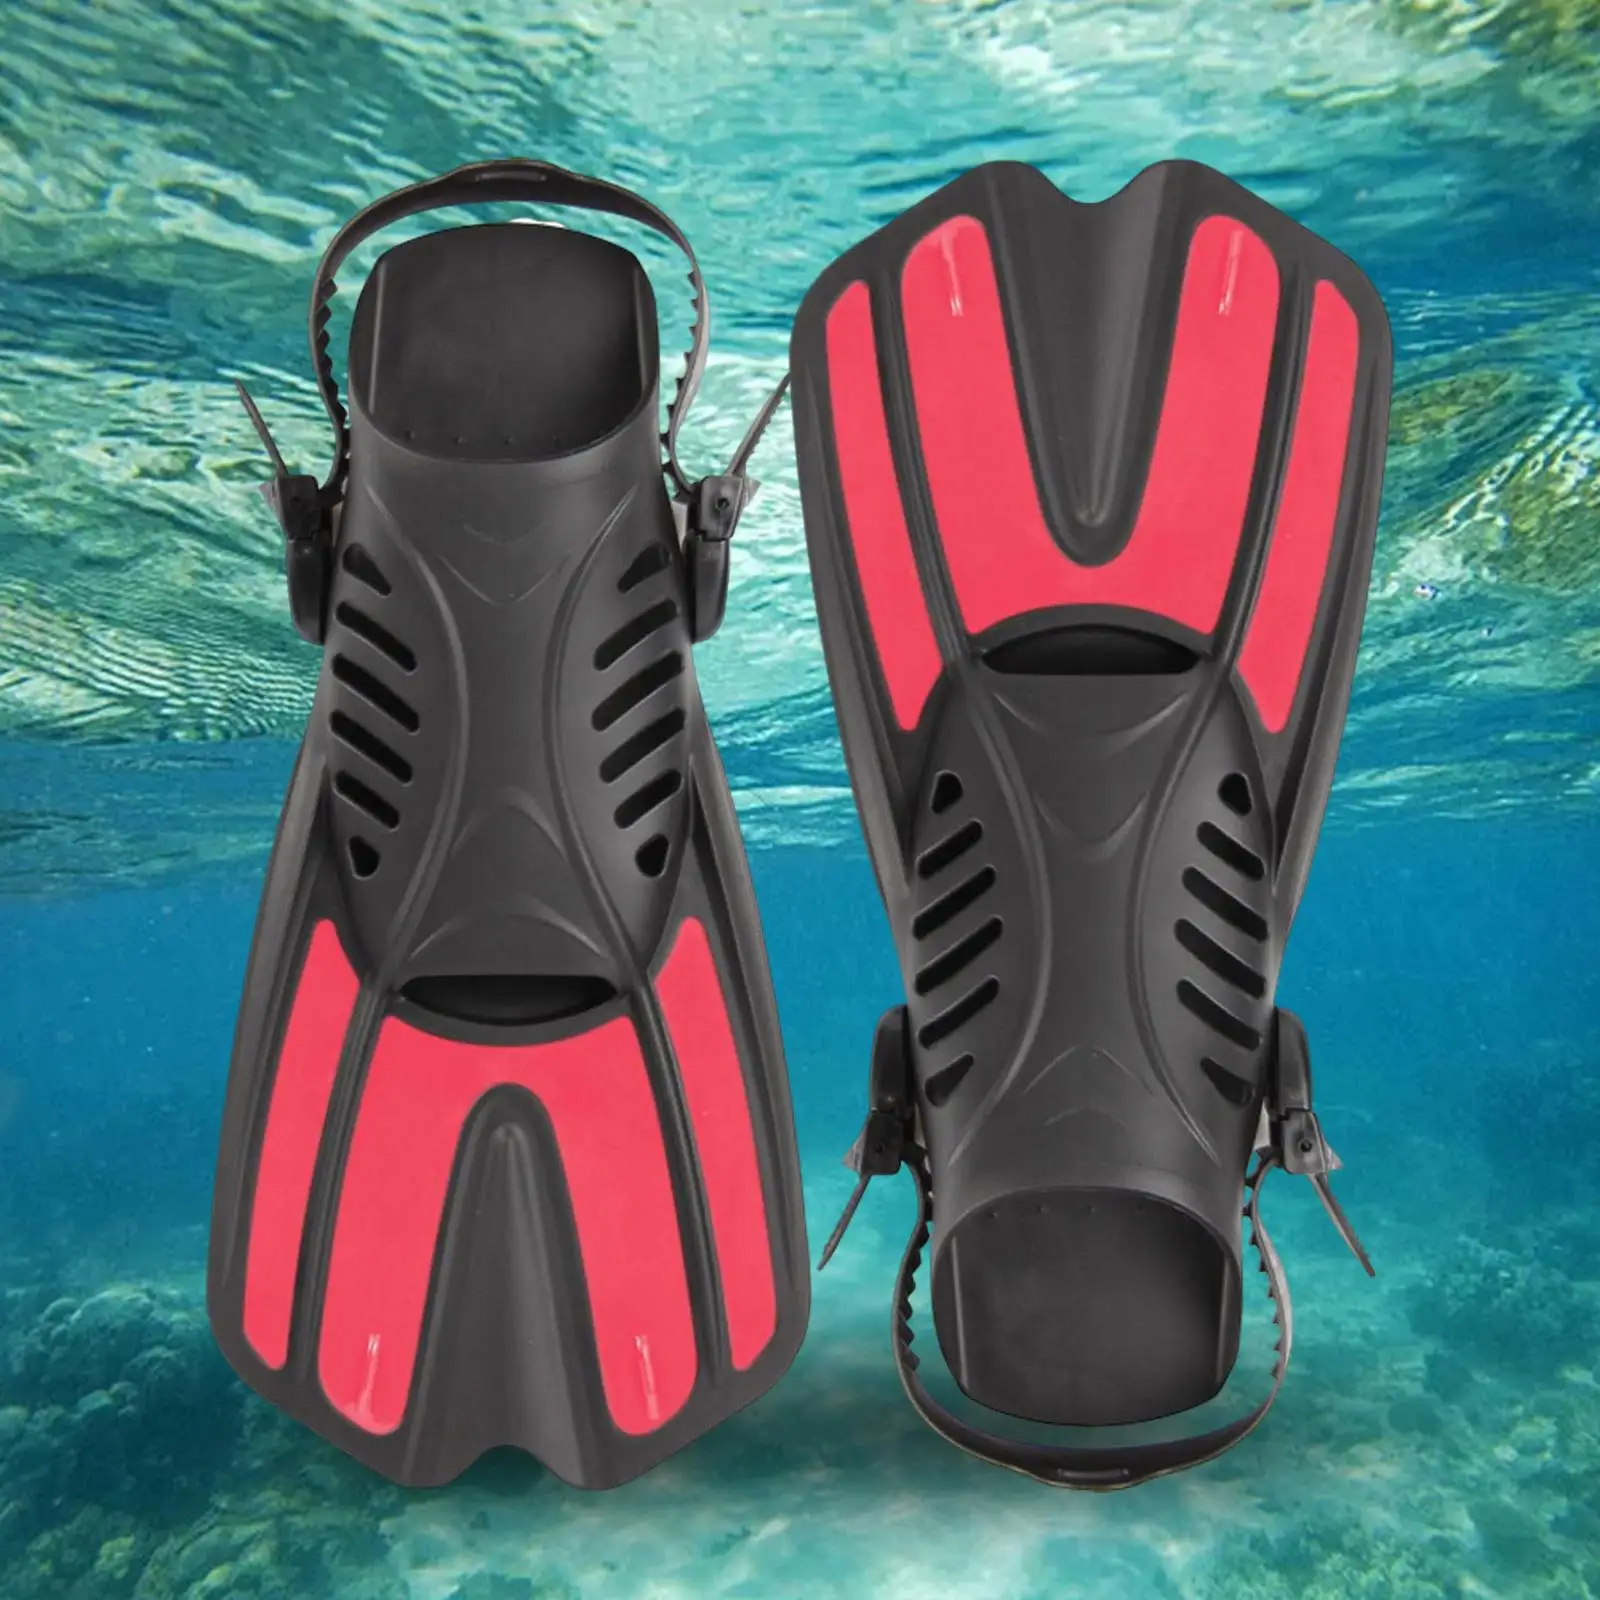 Scuba Diving Swimming Flippers Snorkeling Swiming Training Flippers Adjustable Open Heel Free Diving Equipment Gear for Adults